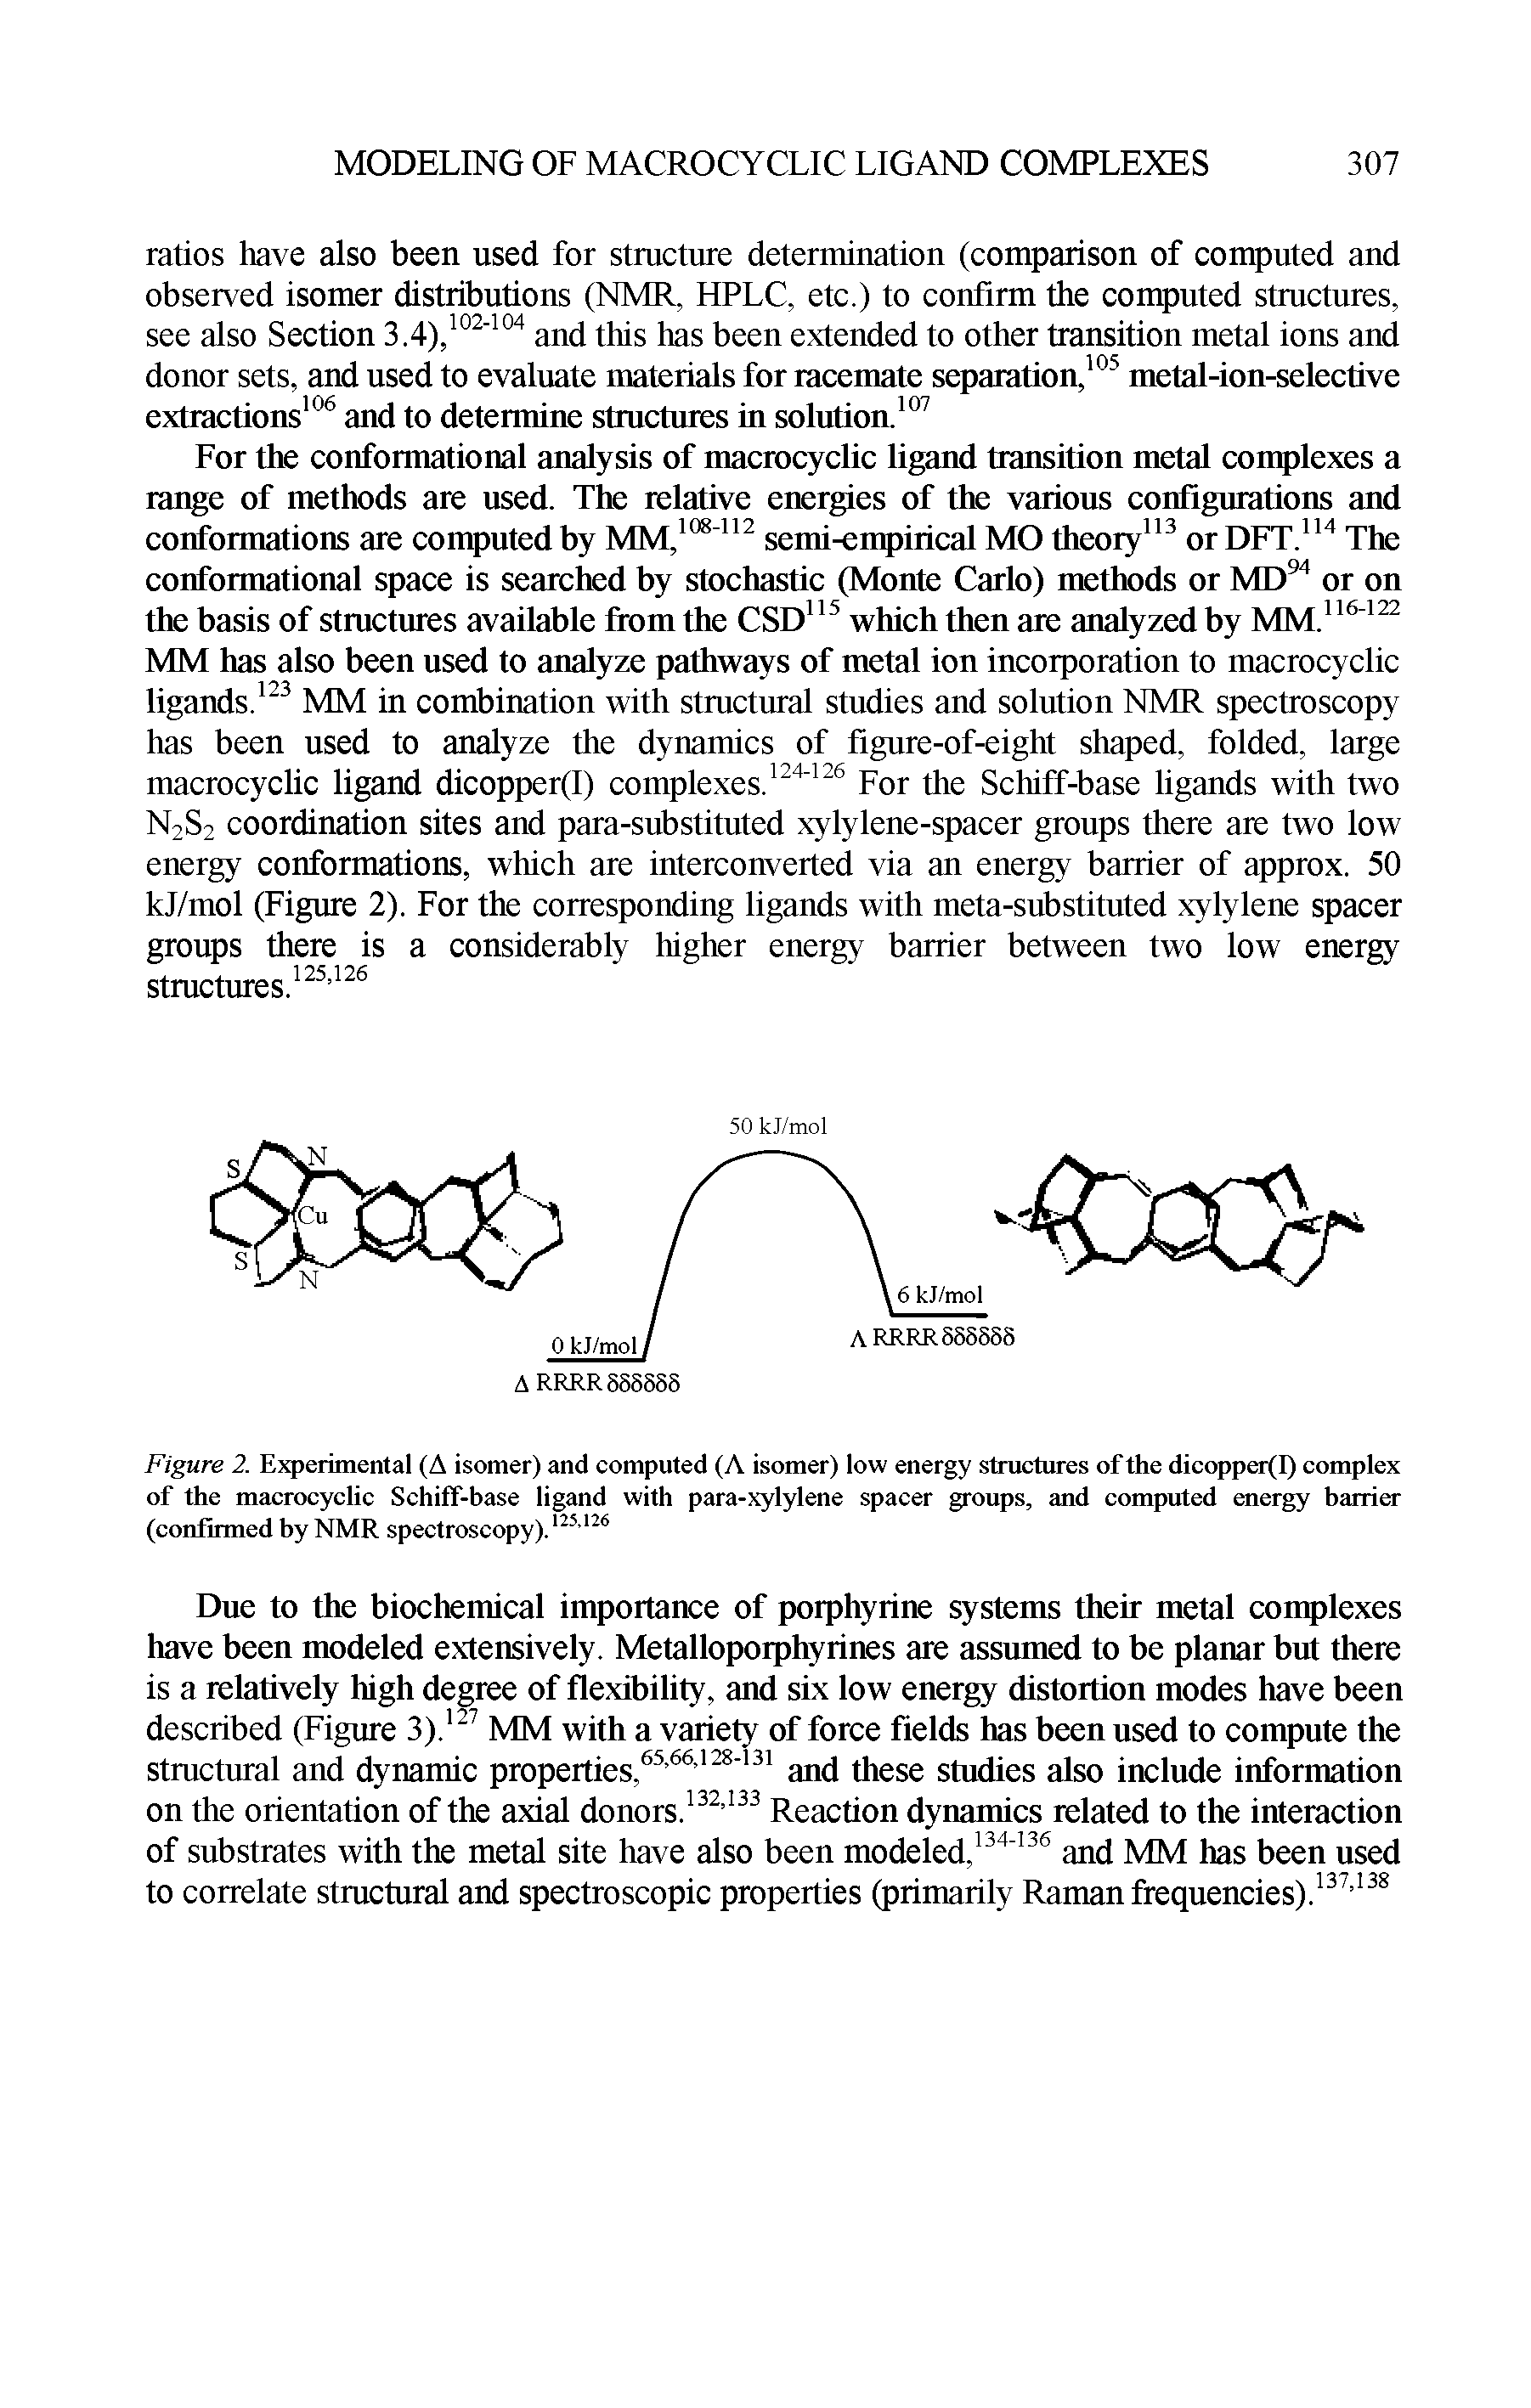 Figure 2. Experimental (A isomer) and computed (A isomer) low energy structures of the dicopper(I) complex of the macrocyclic Schiff-base ligand with para-xylylene spacer groups, and computed energy barrier (confirmed by NMR spectroscopy).125126...